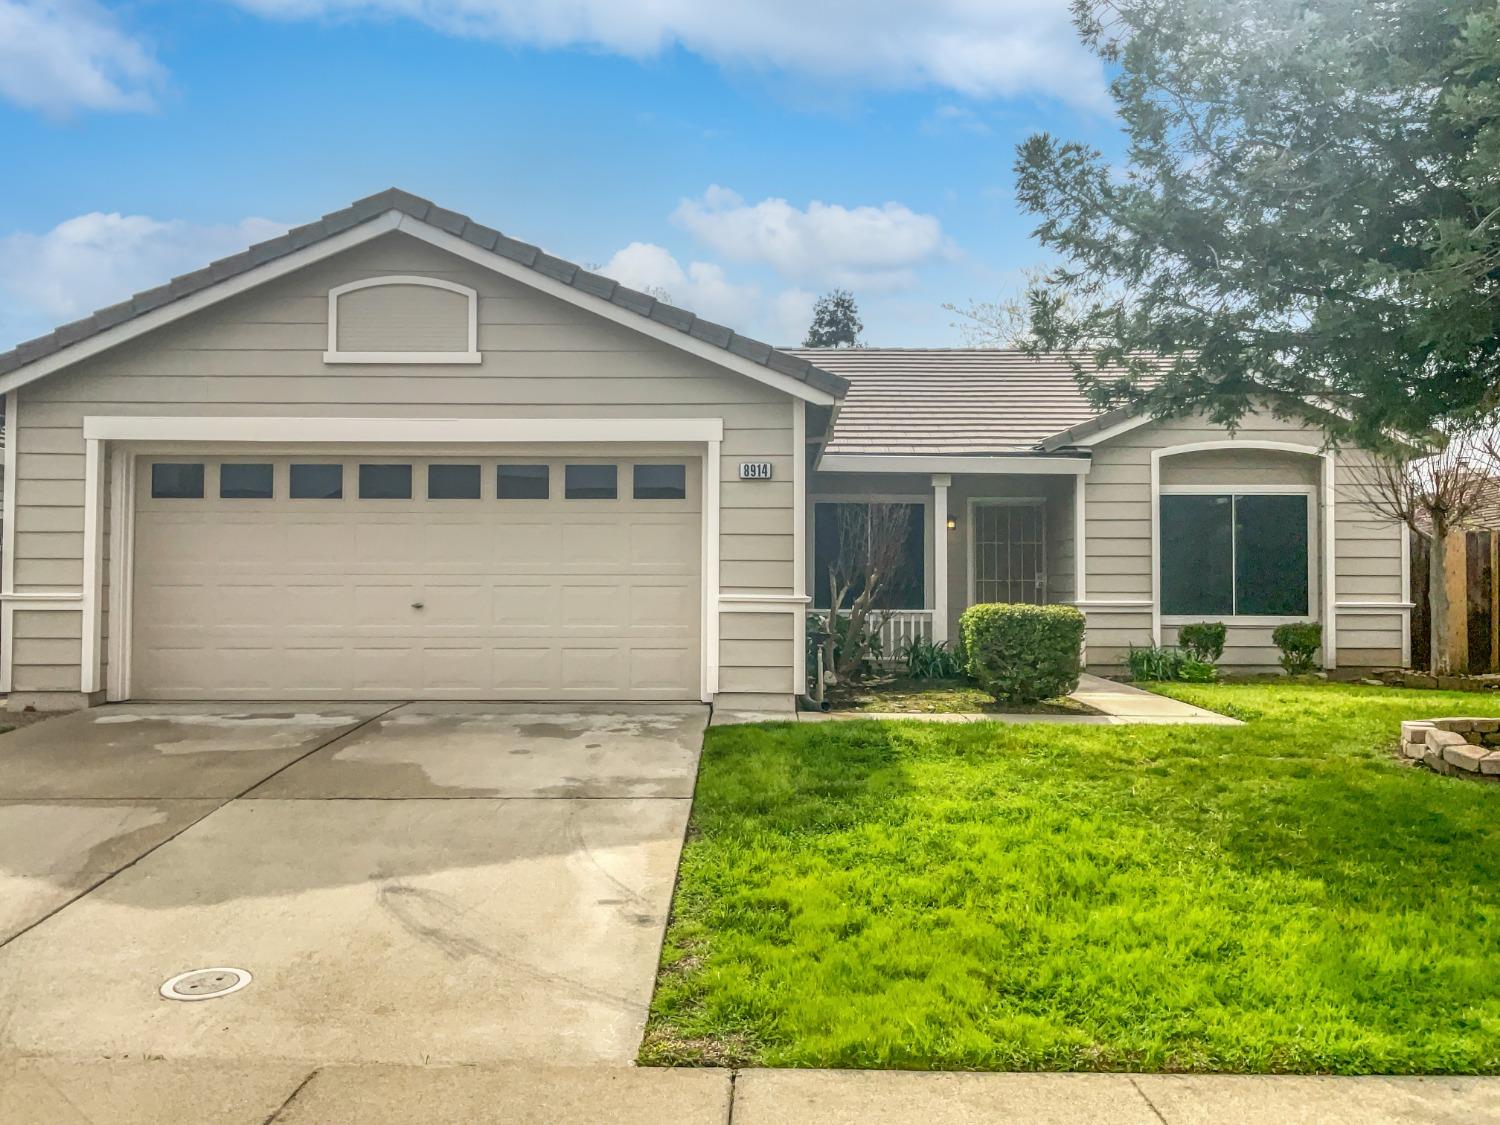 Photo of 8914 Harvest Hill Wy in Elk Grove, CA